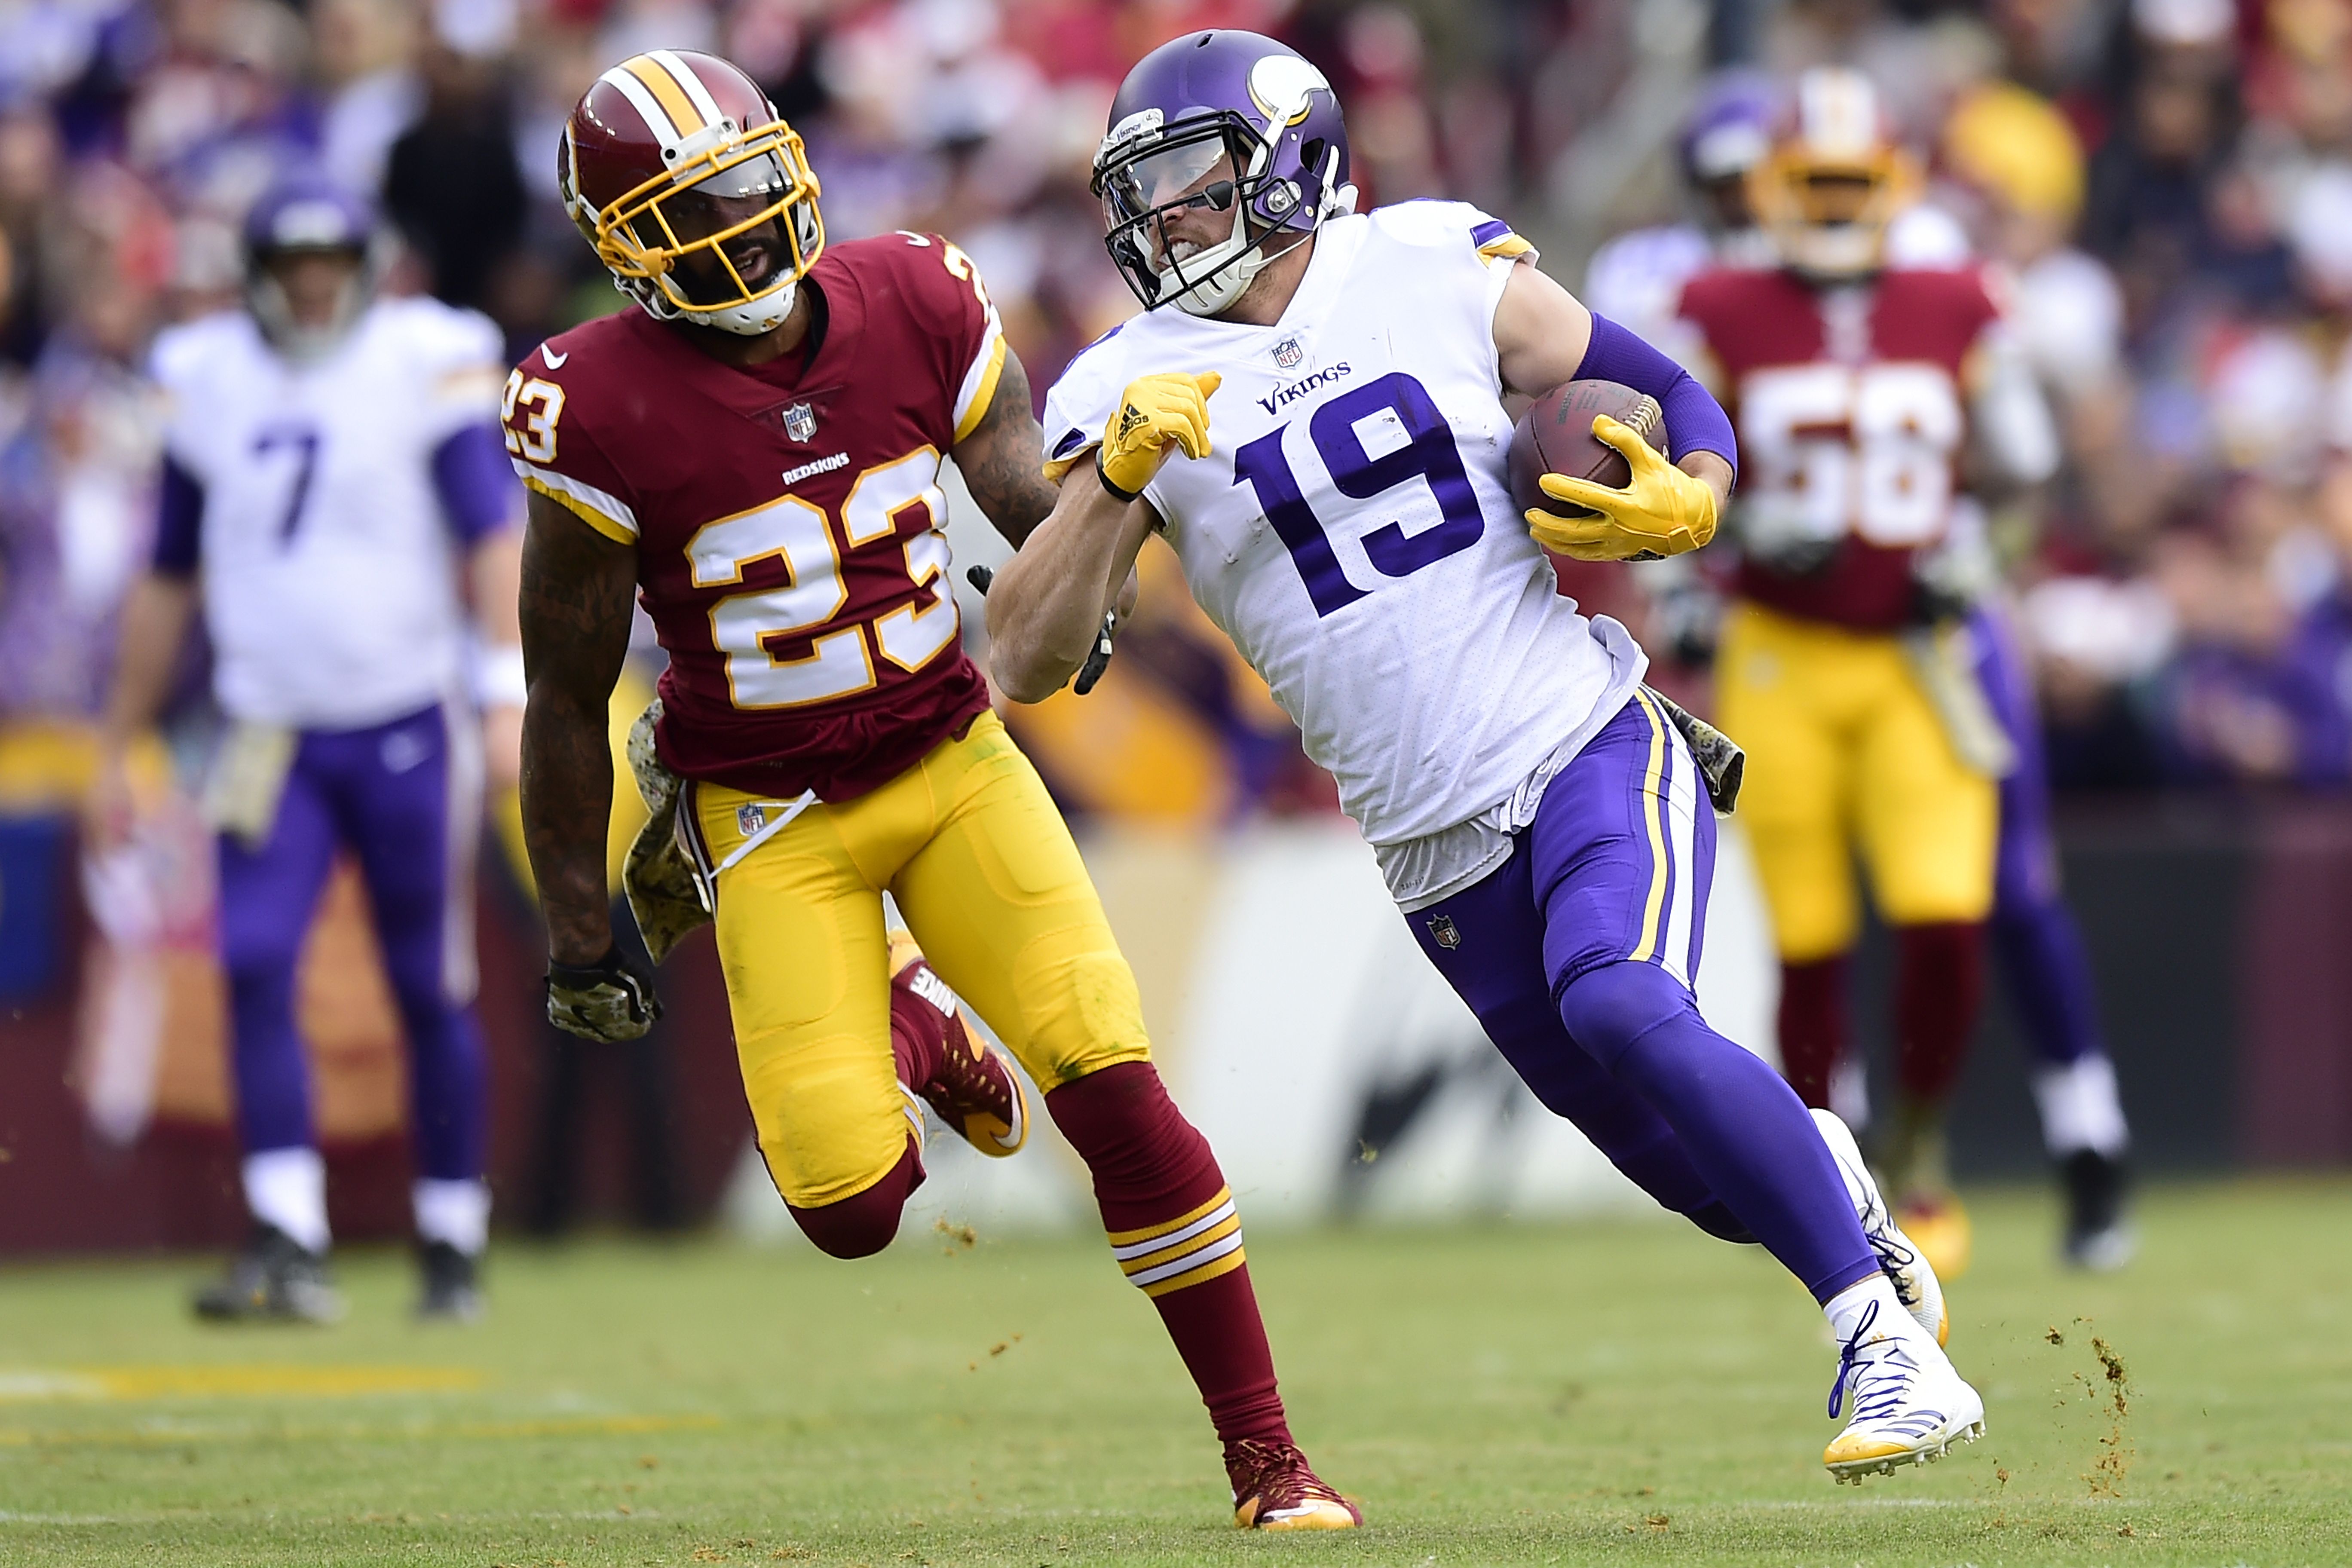 takeaways from the Vikings' Week 10 win over the Redskins